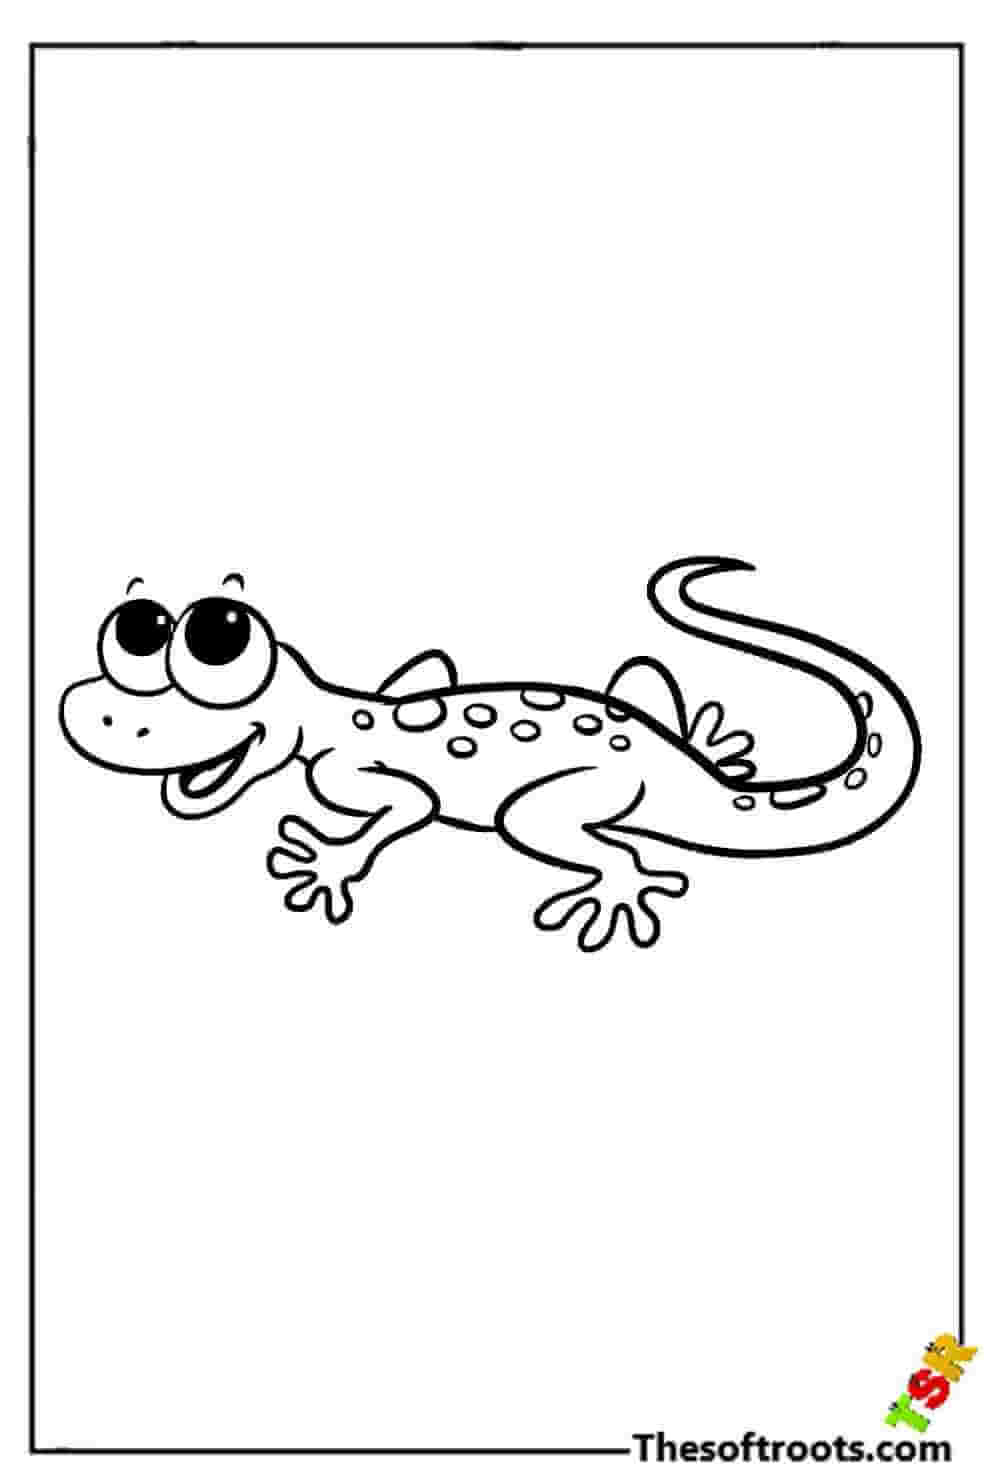 Cartoon lizard coloring pages